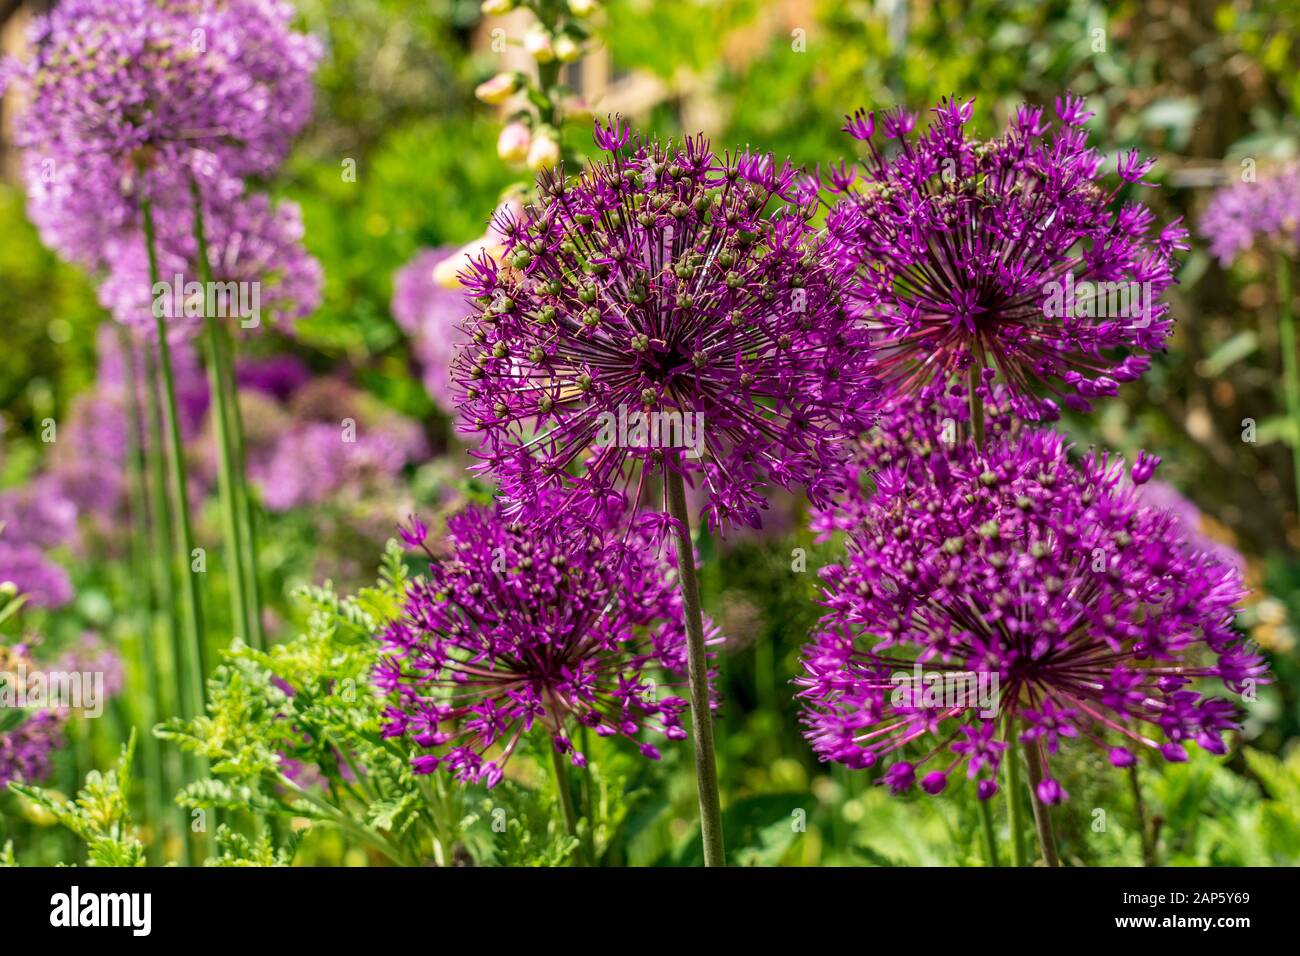 Allium hollandicum Purple Sensation flower heads in various shades of purple, flowering in a border with out of focus background Stock Photo